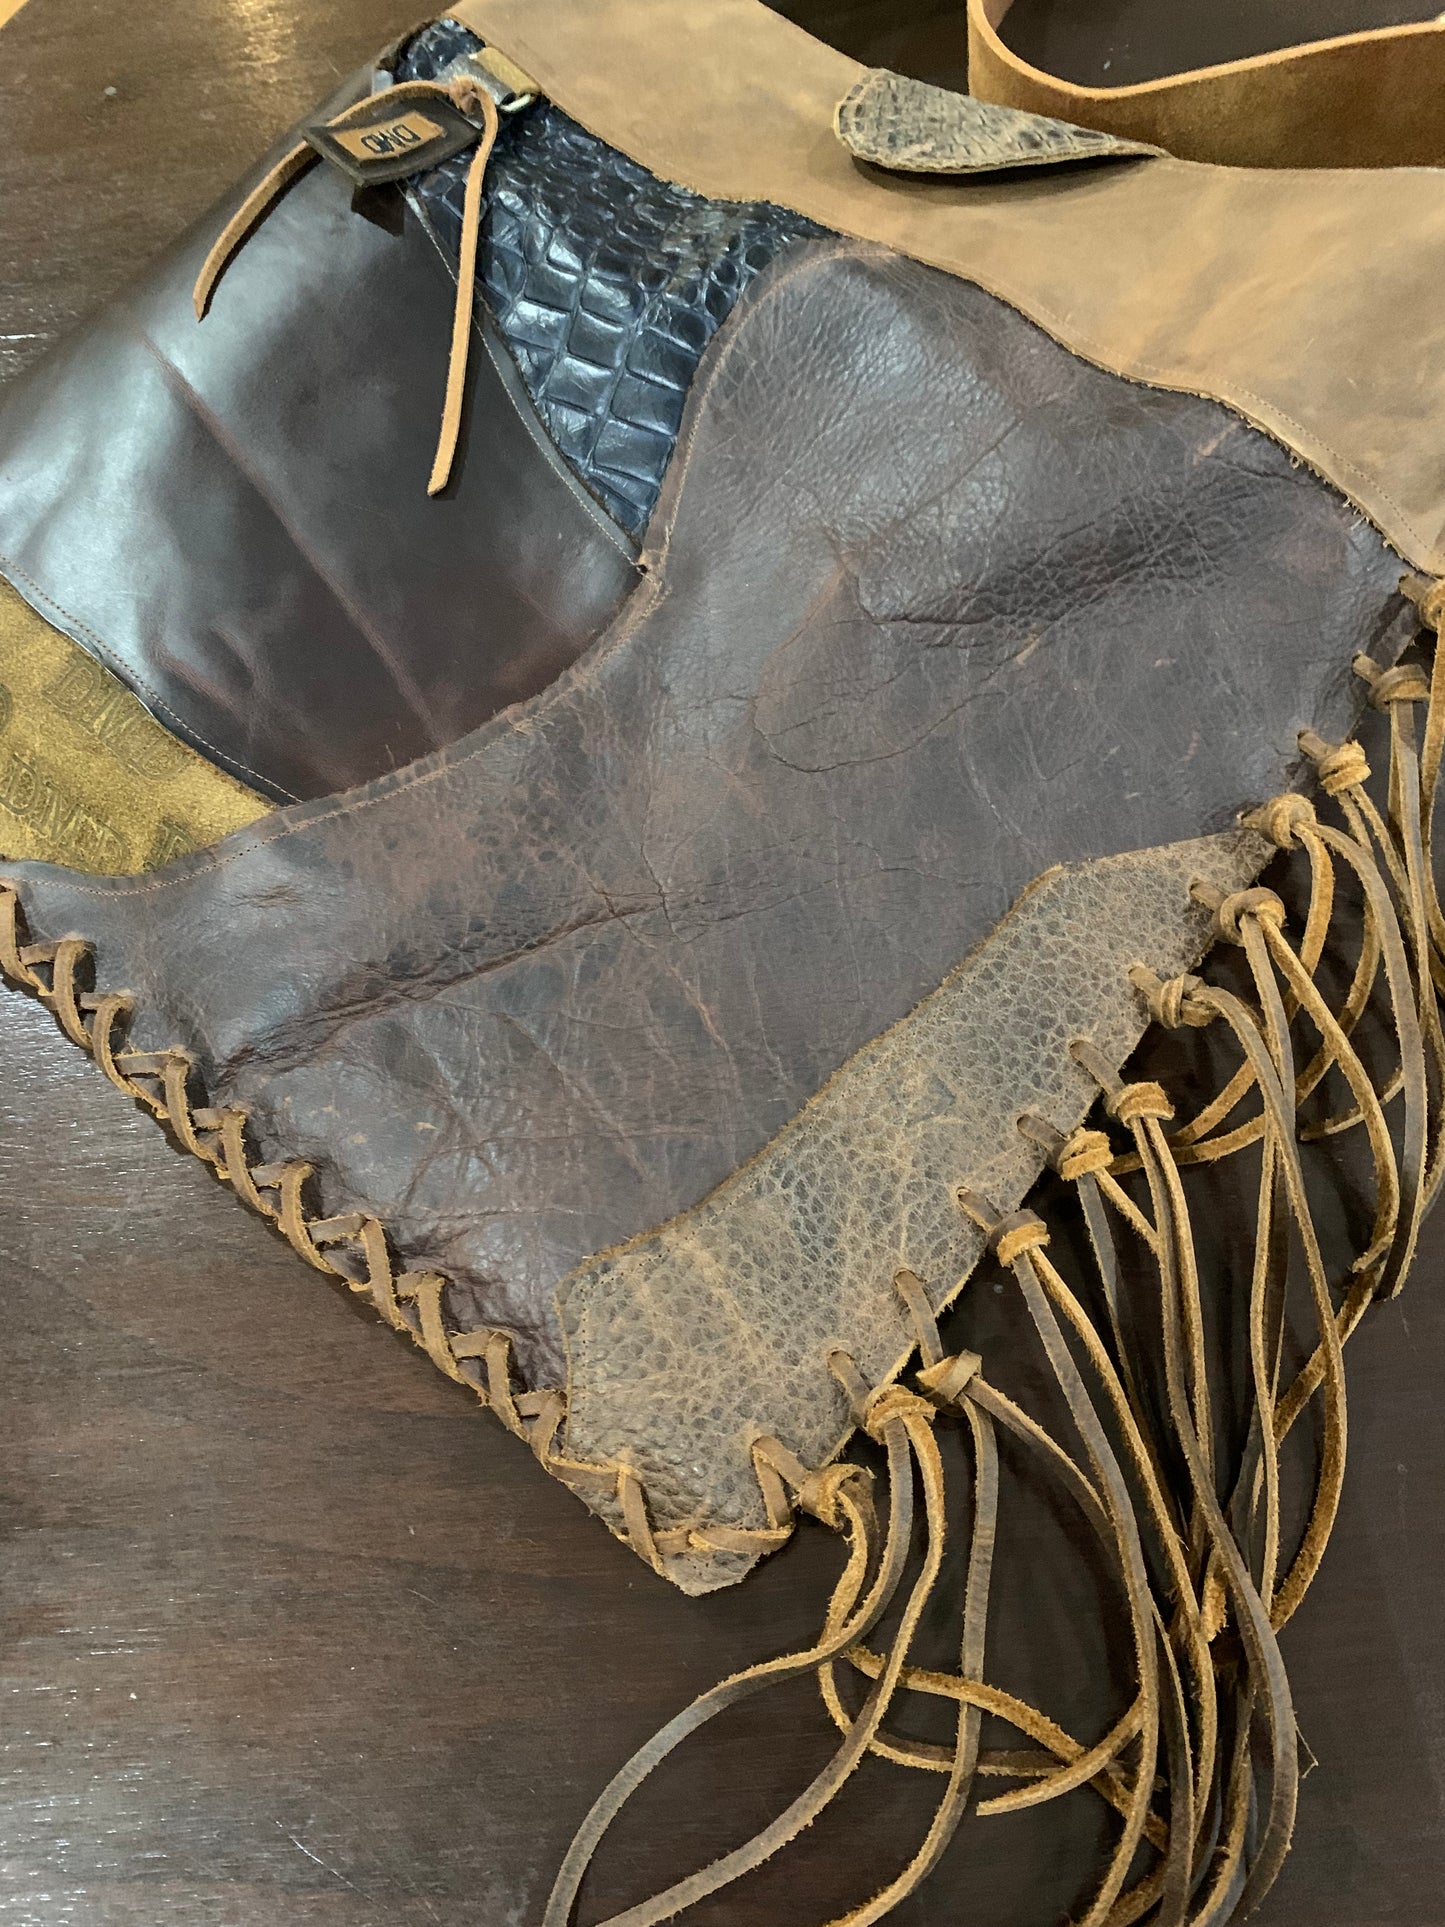 Rustic Leather Bag - DMD Bags